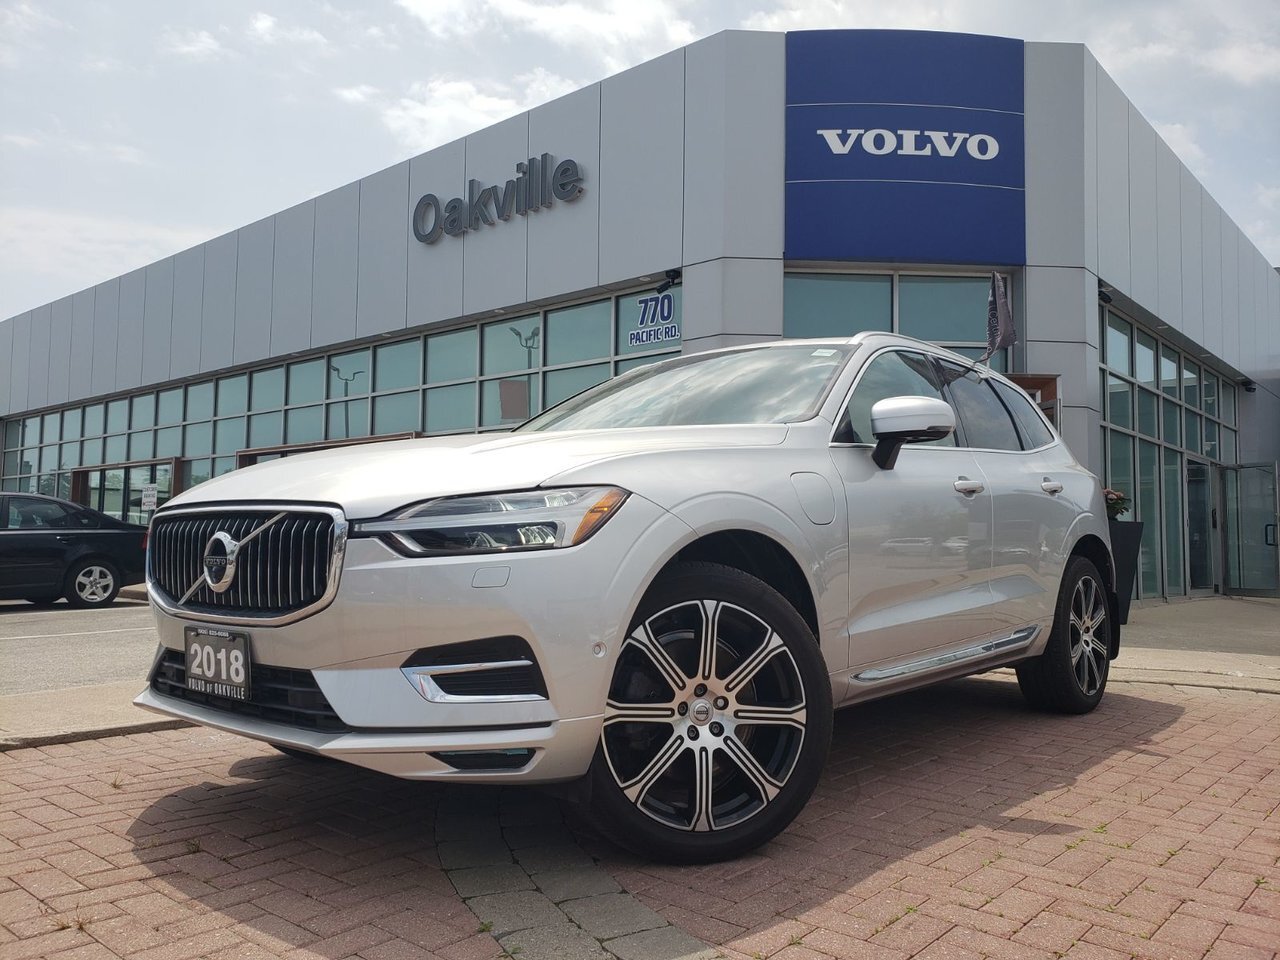 2018 Volvo XC60 T8 eAWD Inscription FINANCE Available!